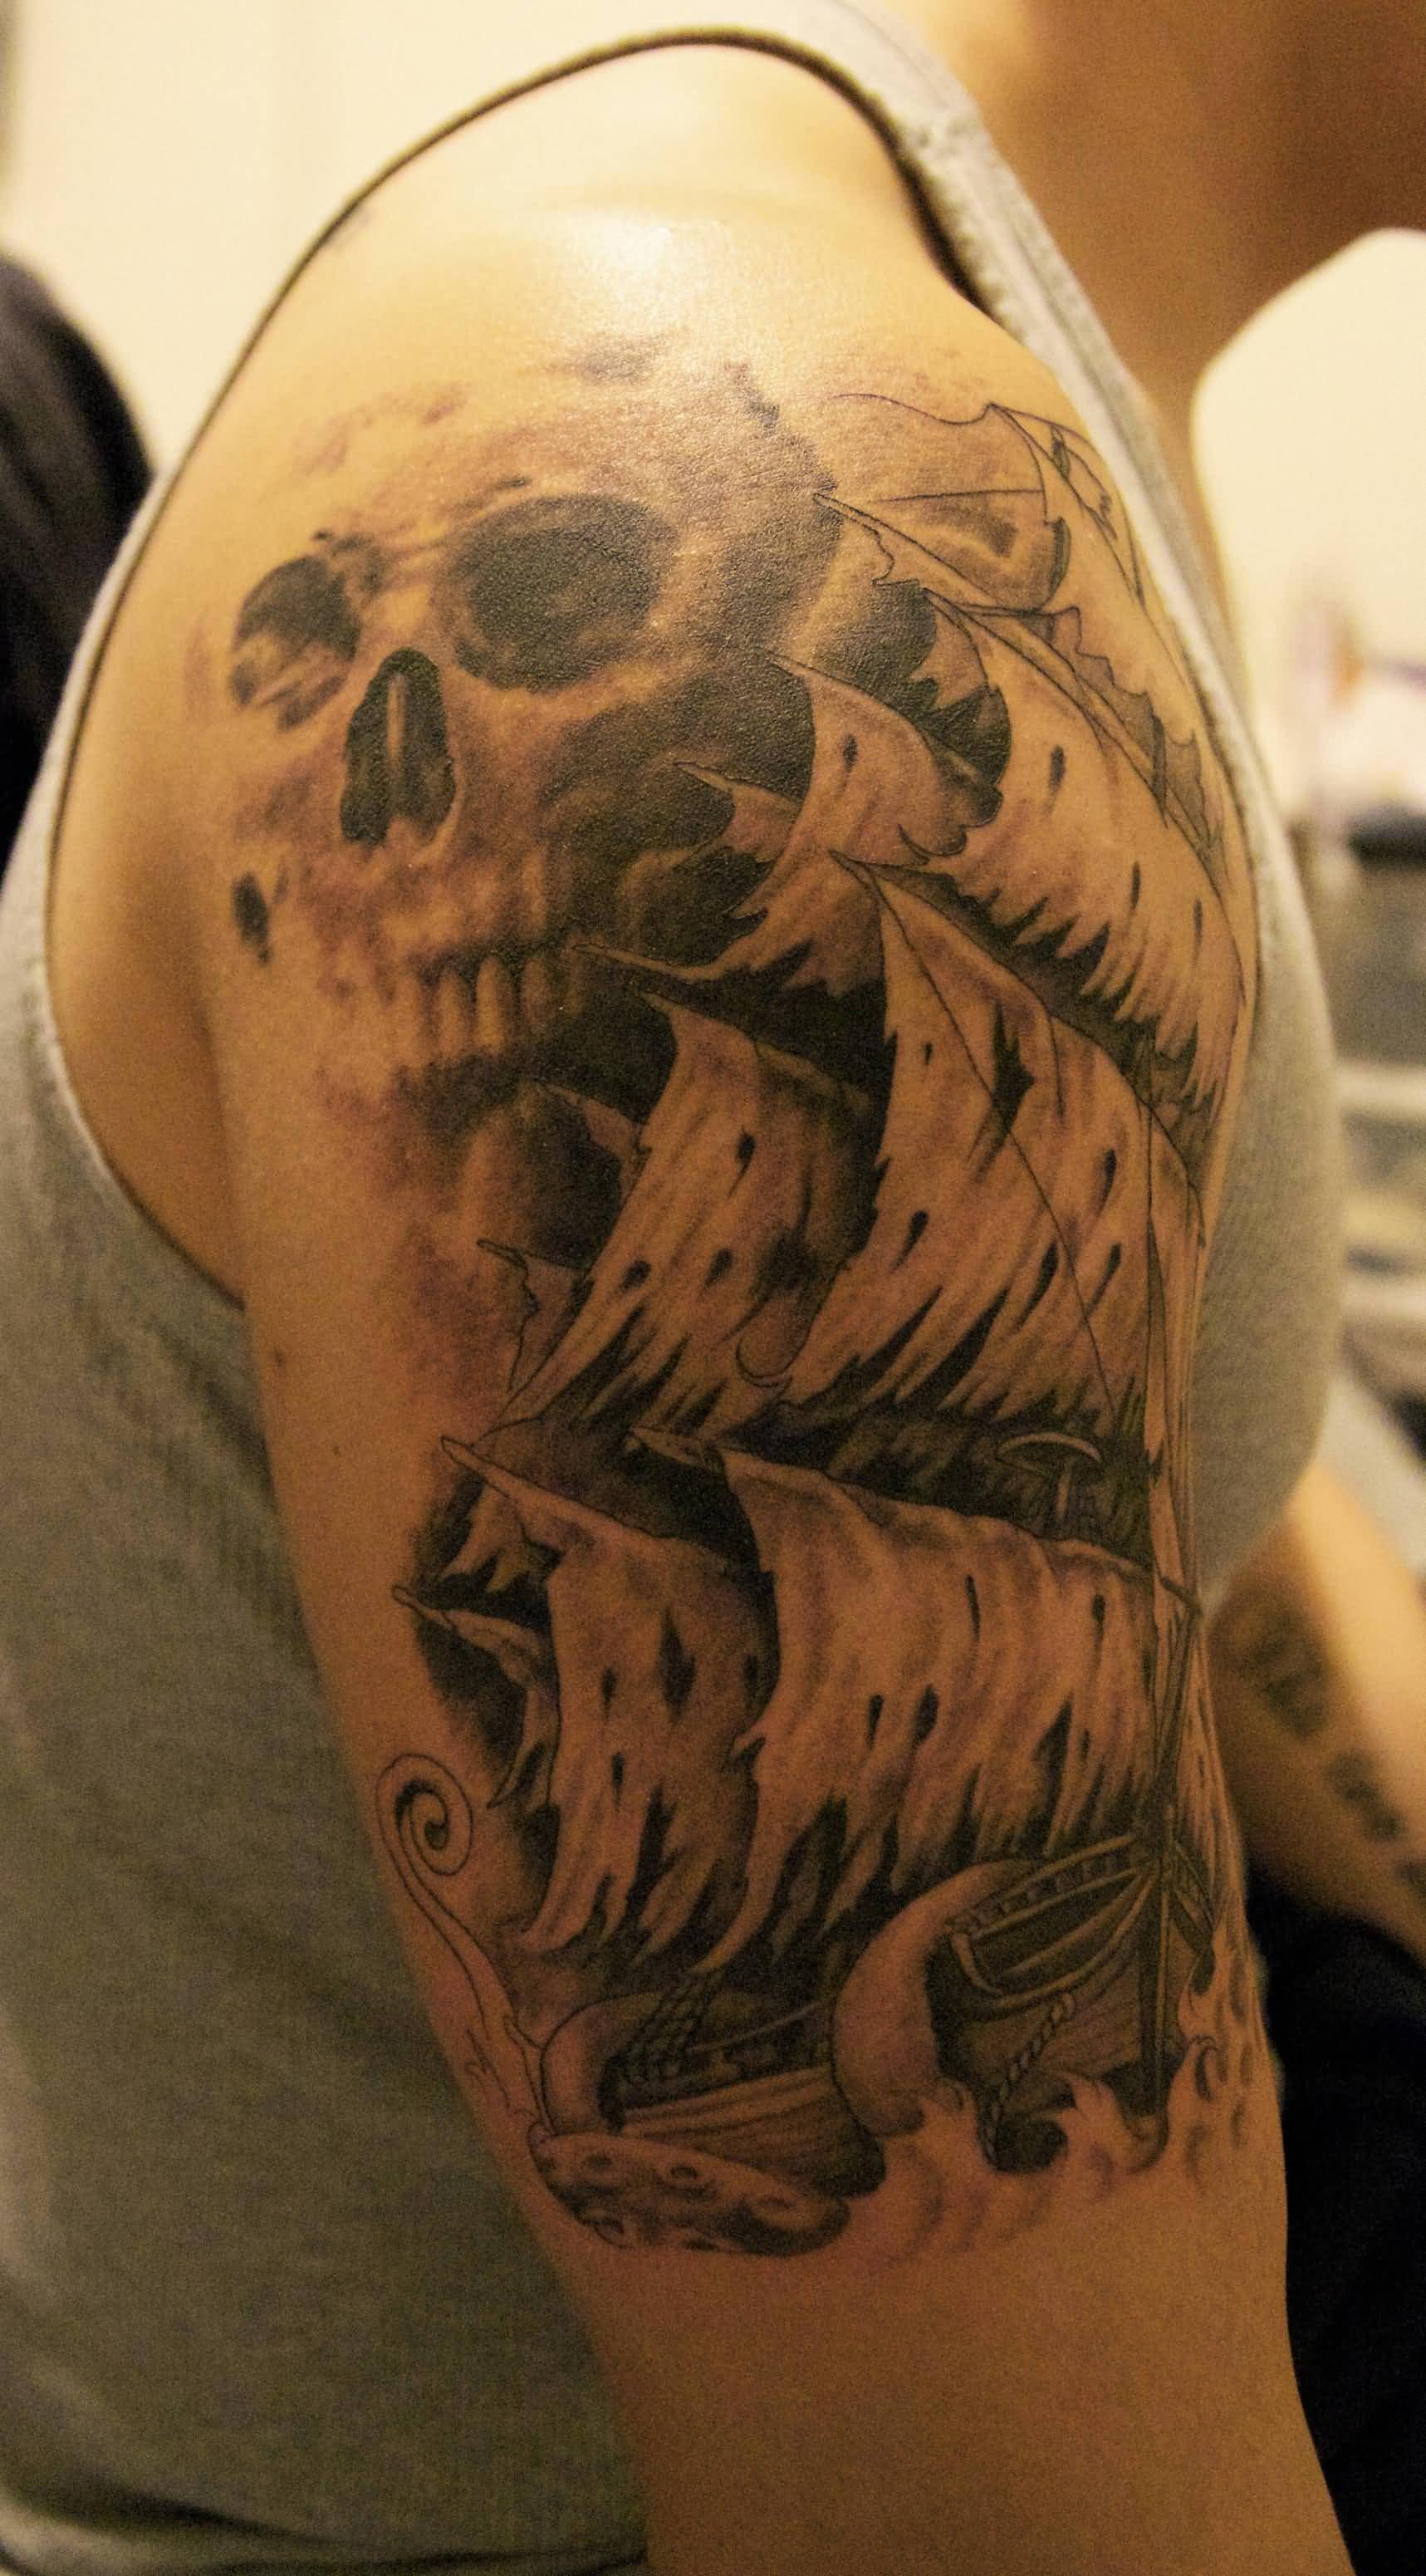 Classic Black And Grey Pirate Ship With Skull Tattoo On Man Right Half Sleeve